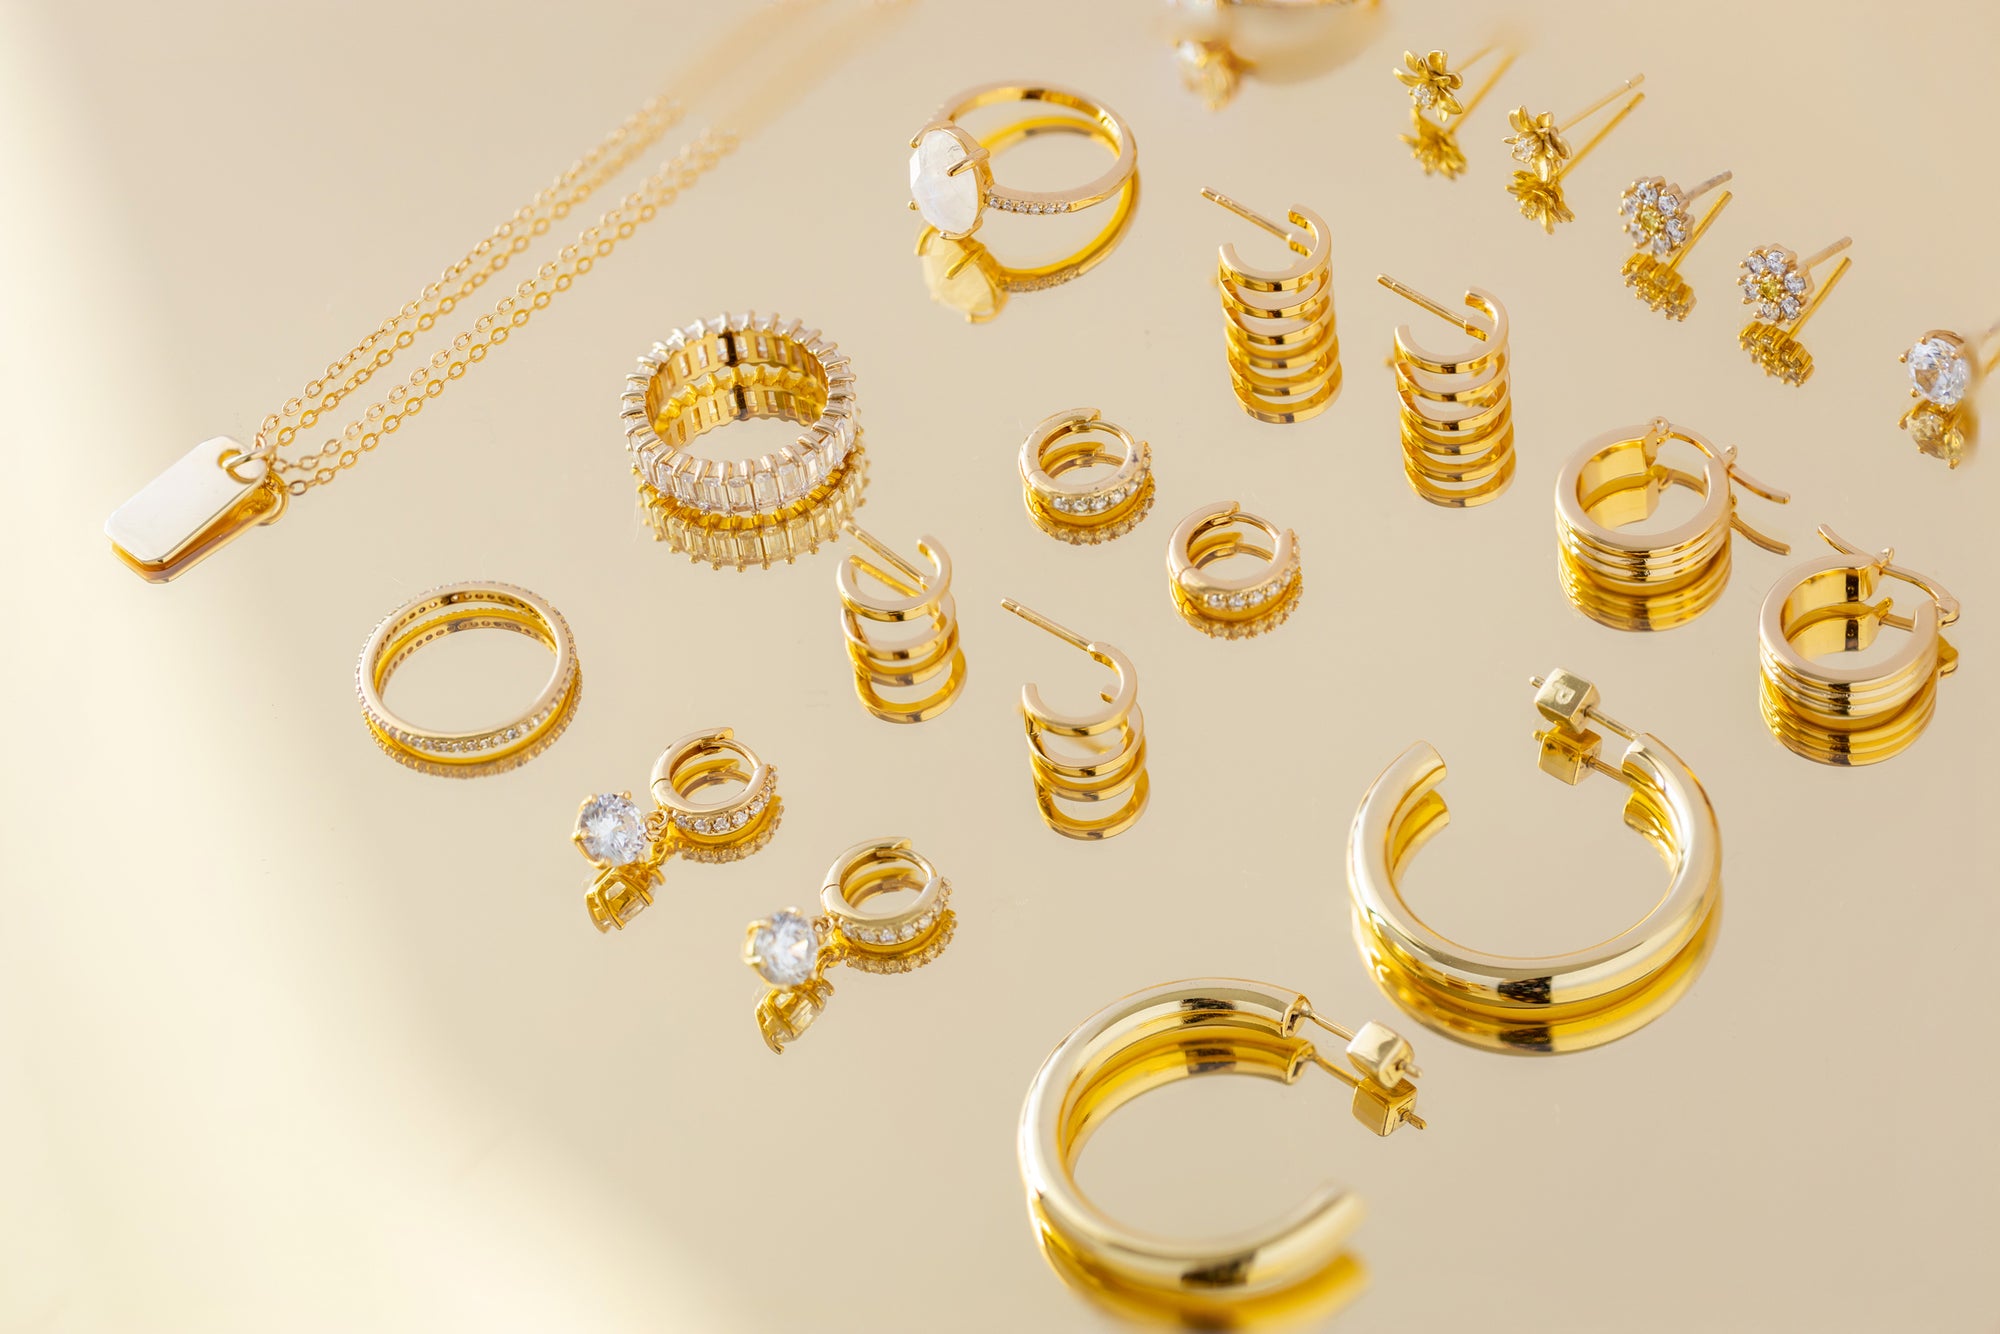 Complete Jewelry Guide: Kinds, Materials, & FAQ